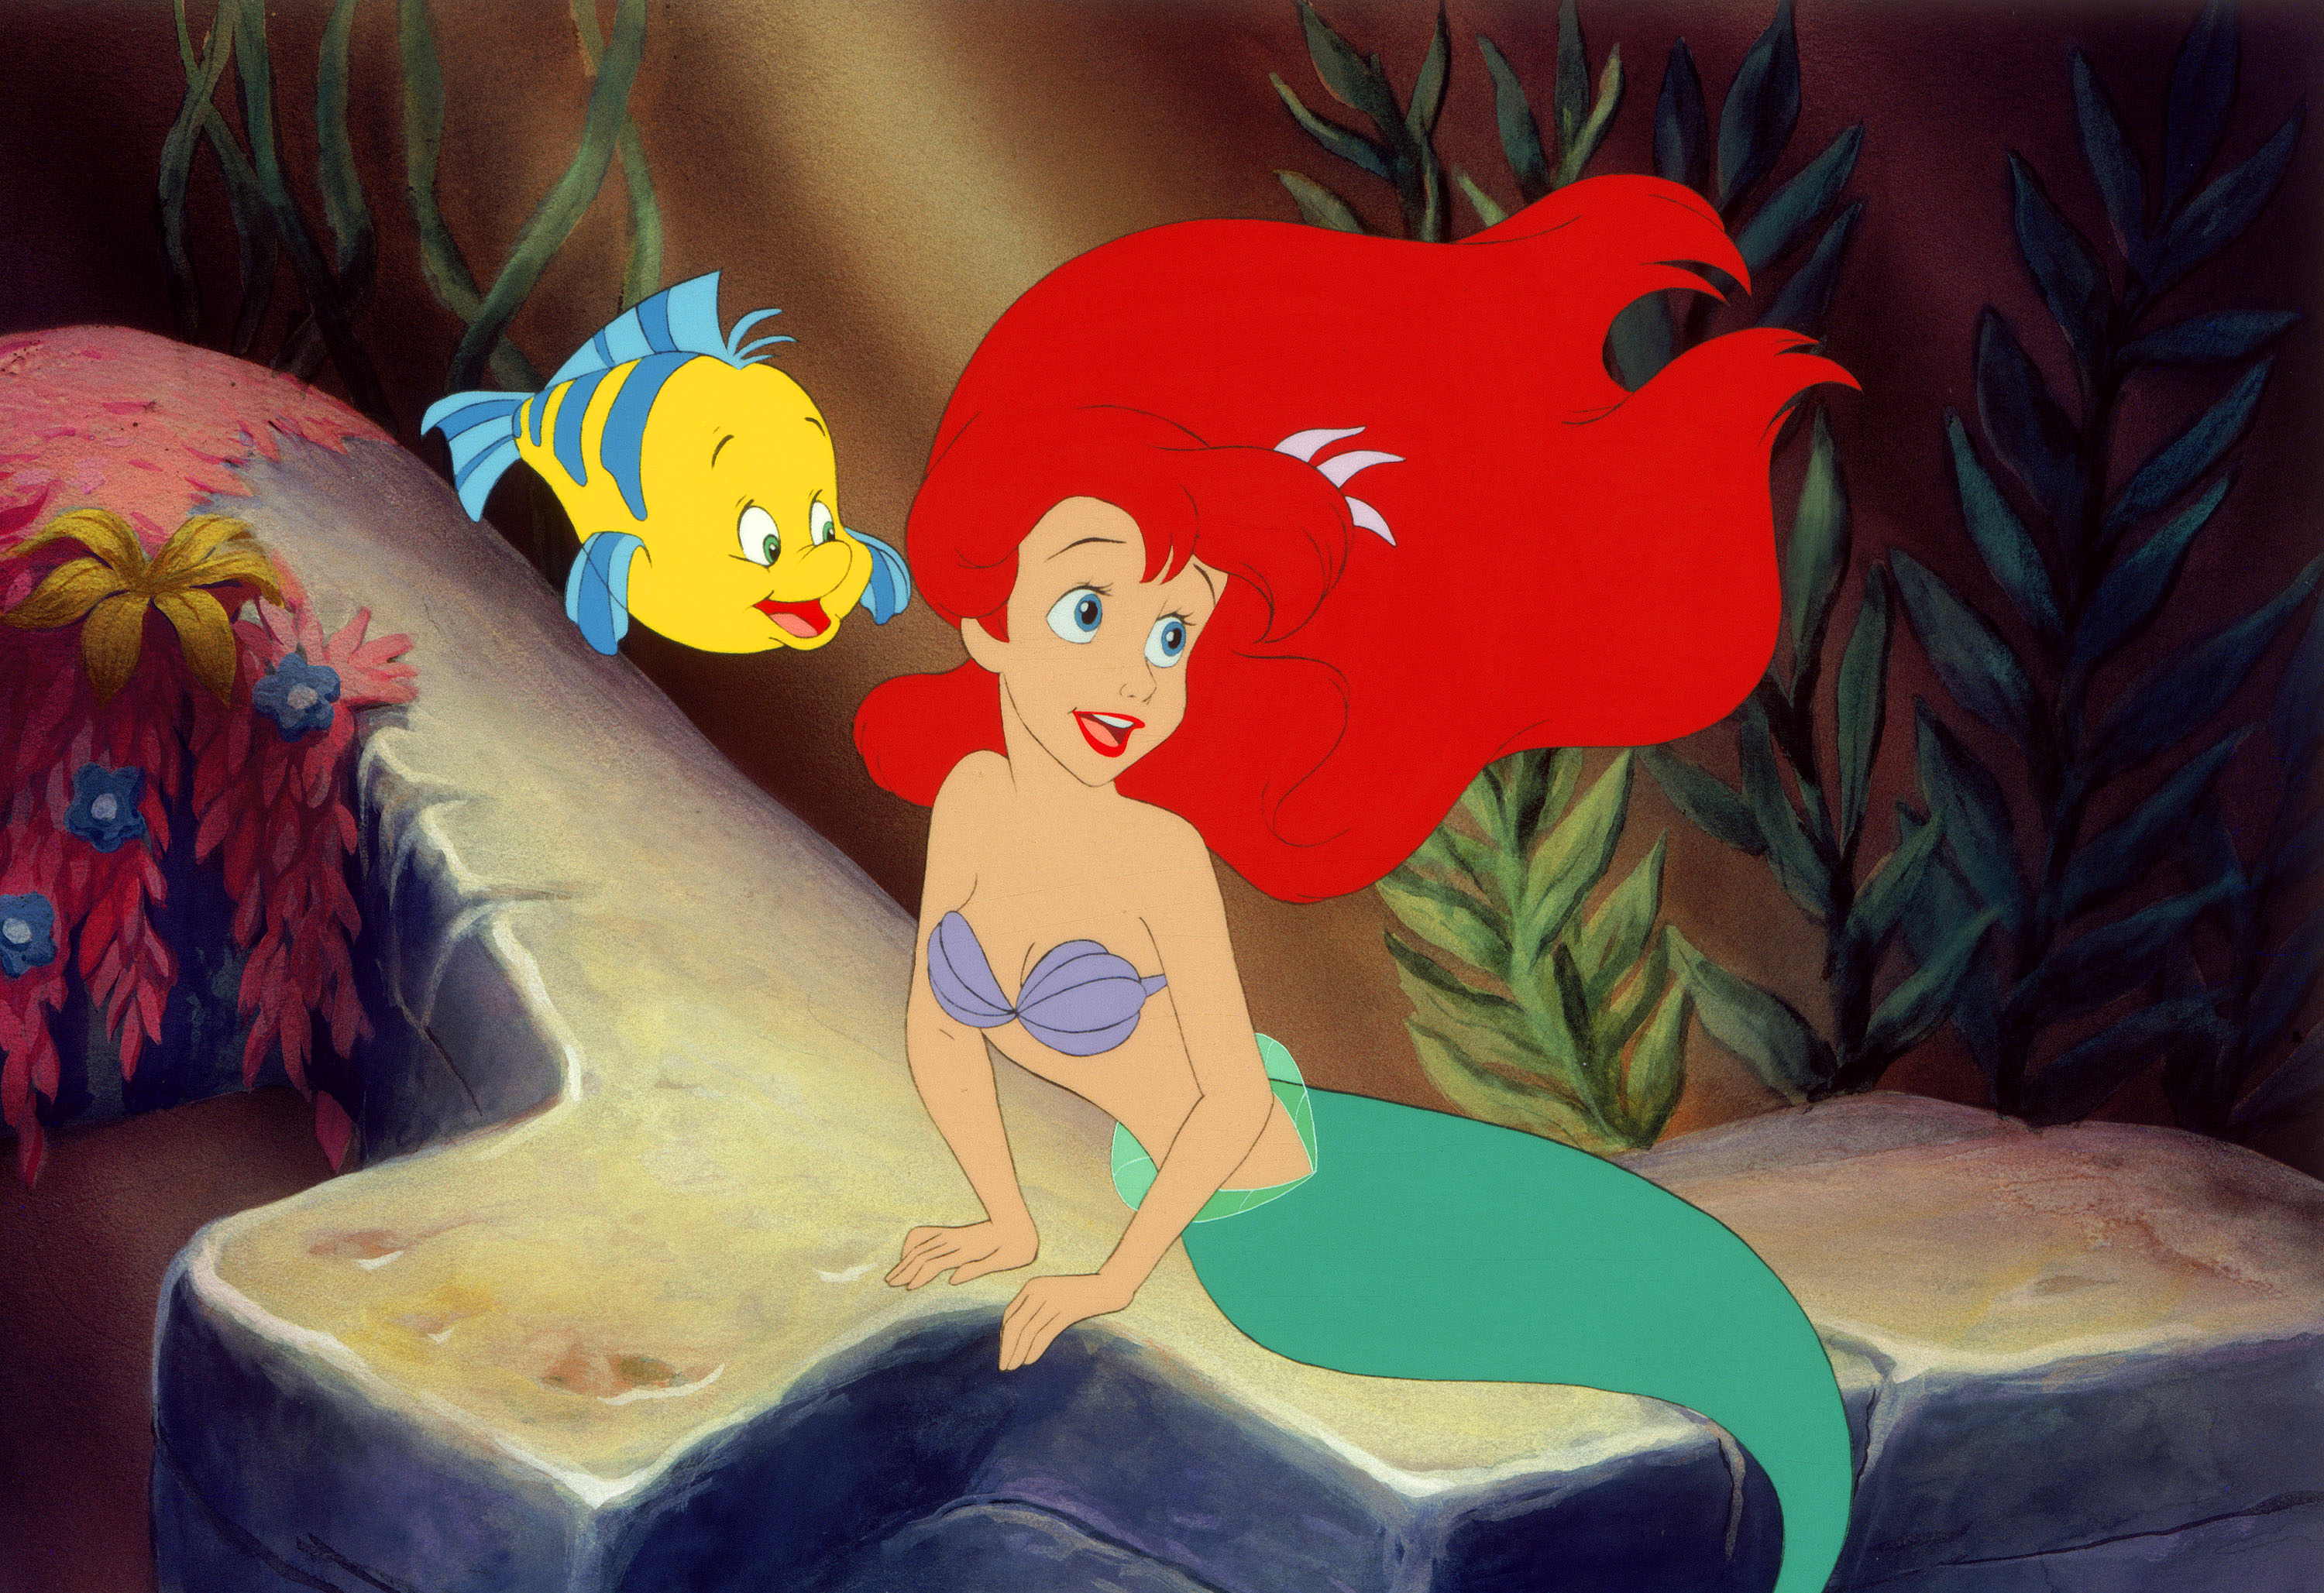  then there’s Disney’s The Little Mermaid opening on September 13